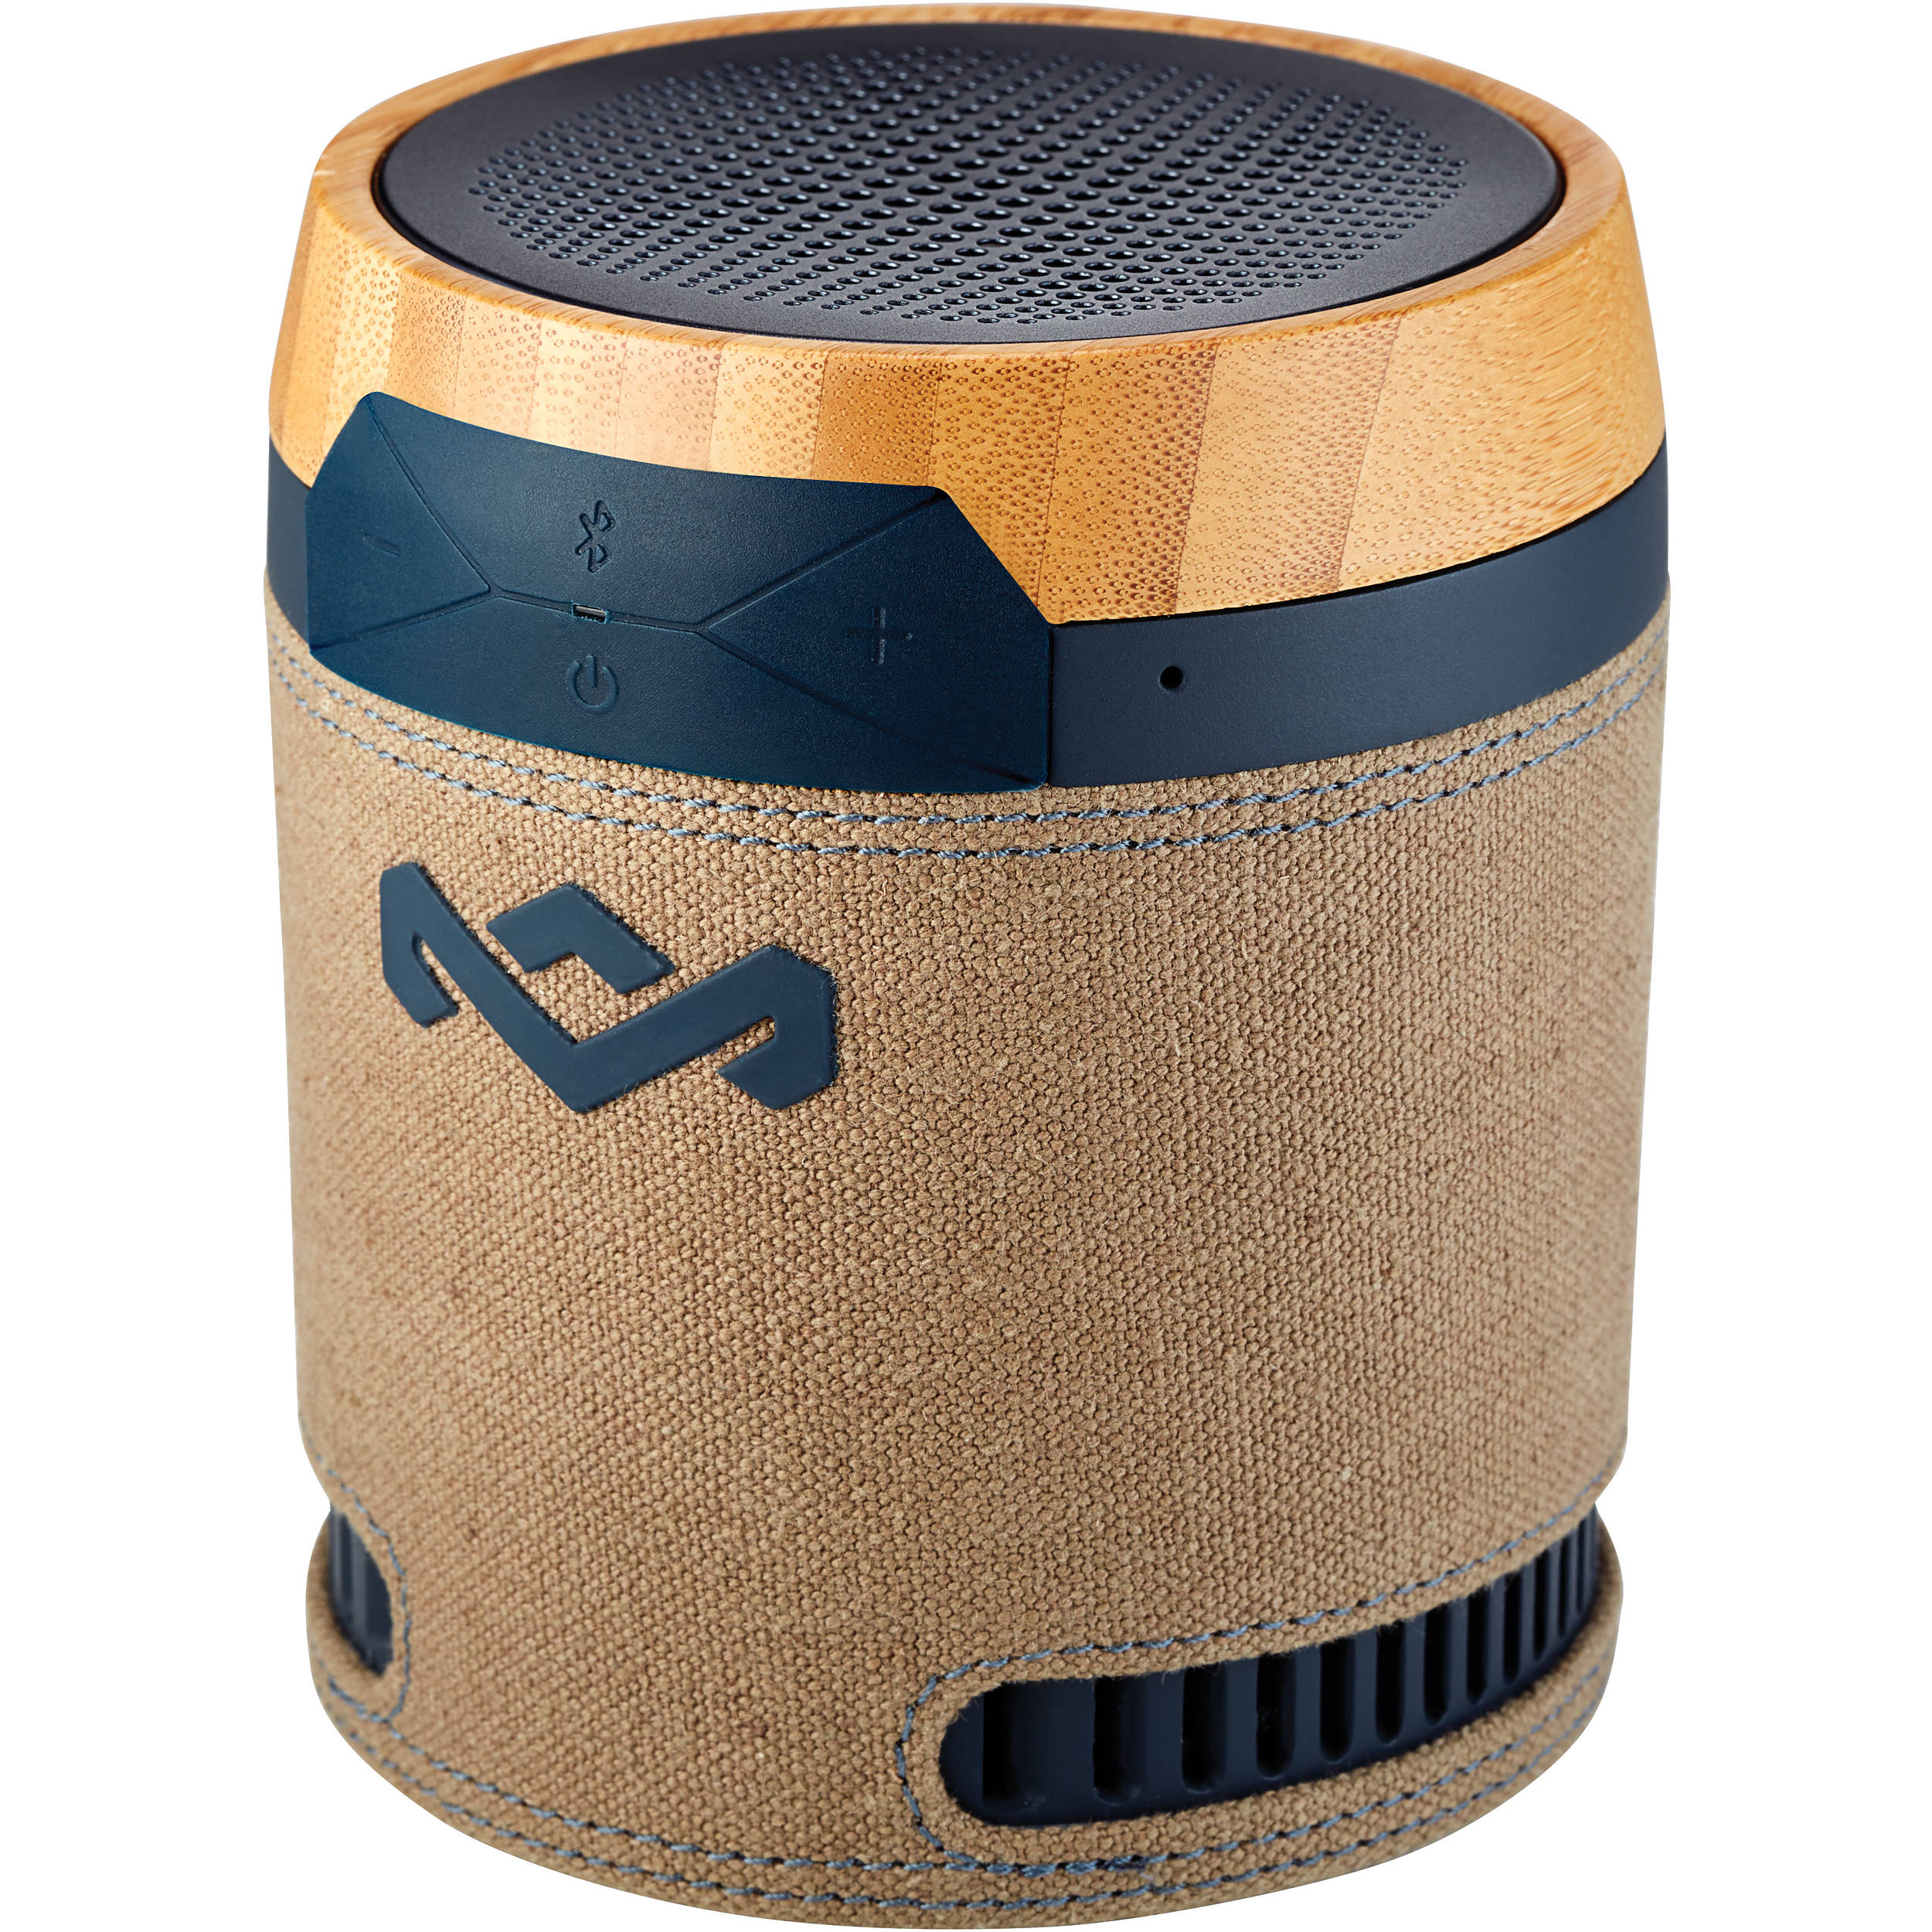 House of Marley Chant BT Portable 